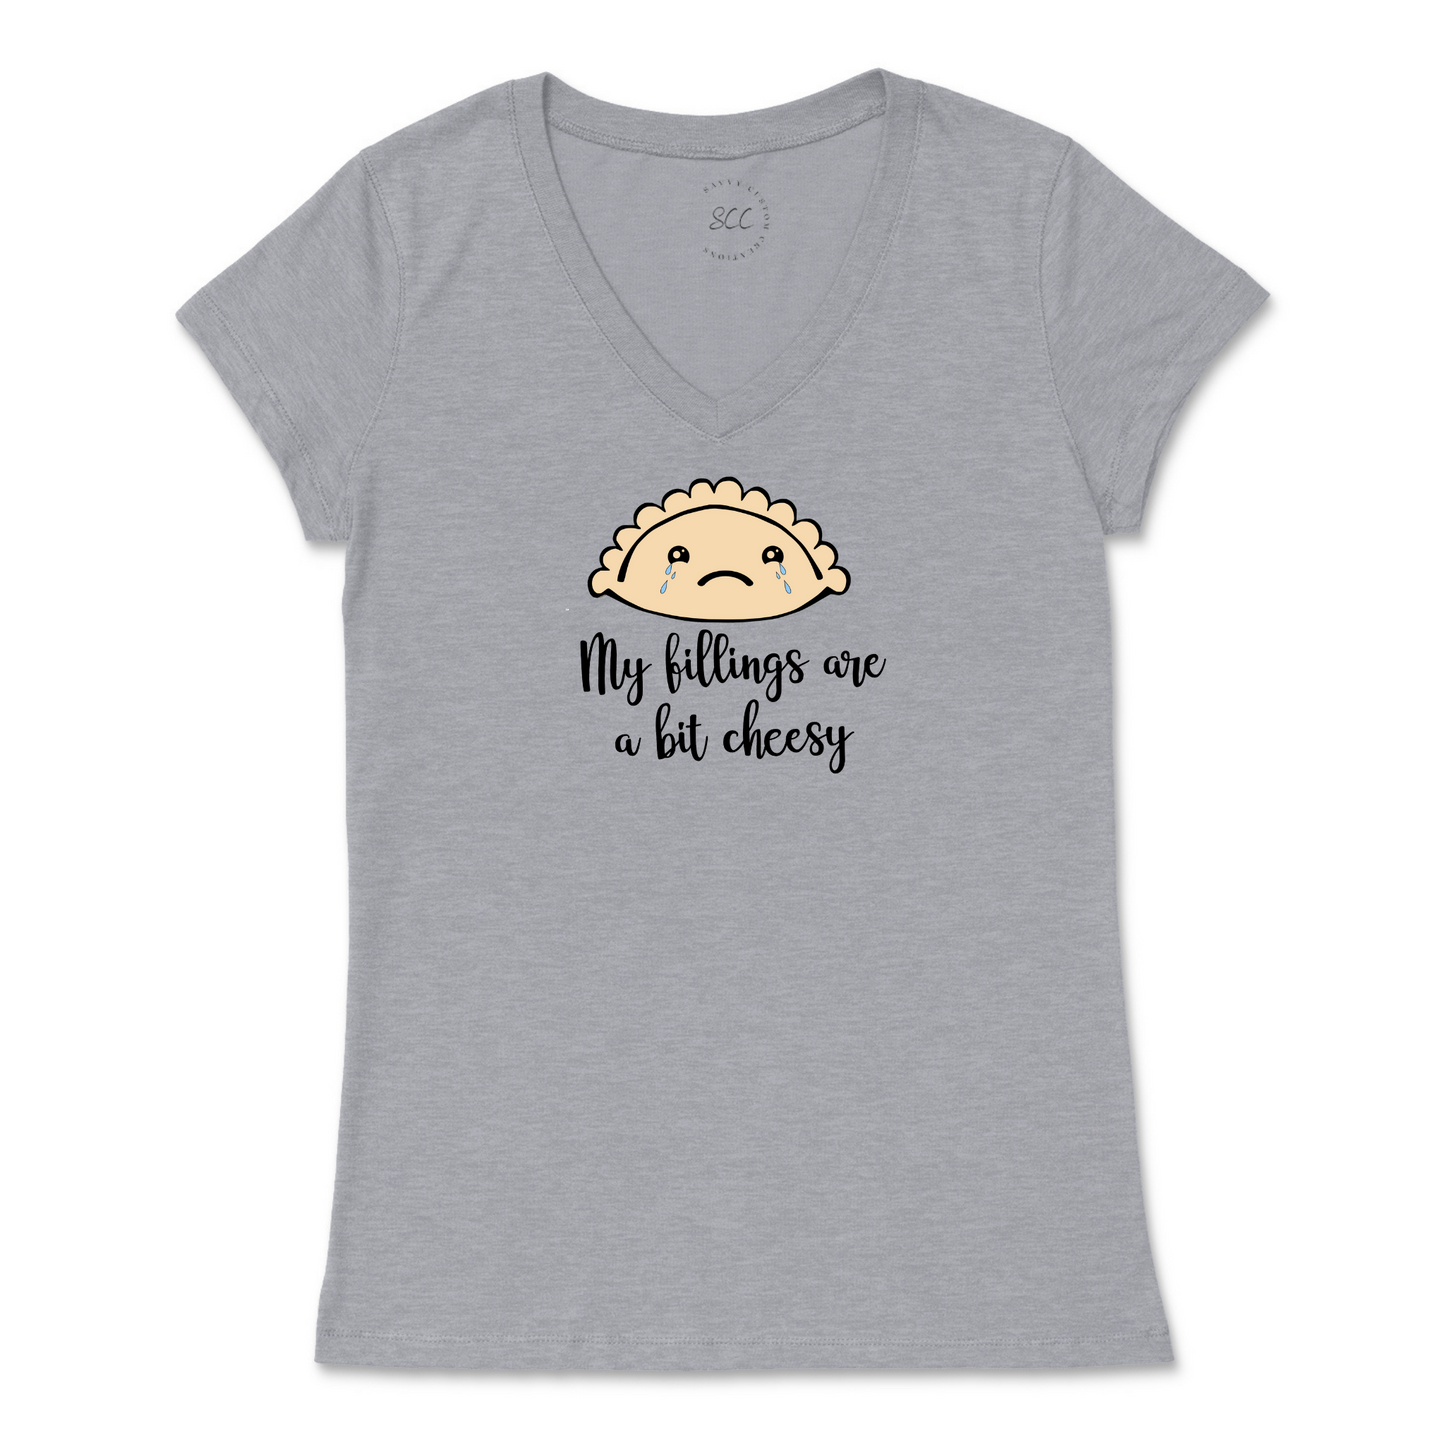 My fillings are a bit cheesy - Women’s VNeck T-Shirt